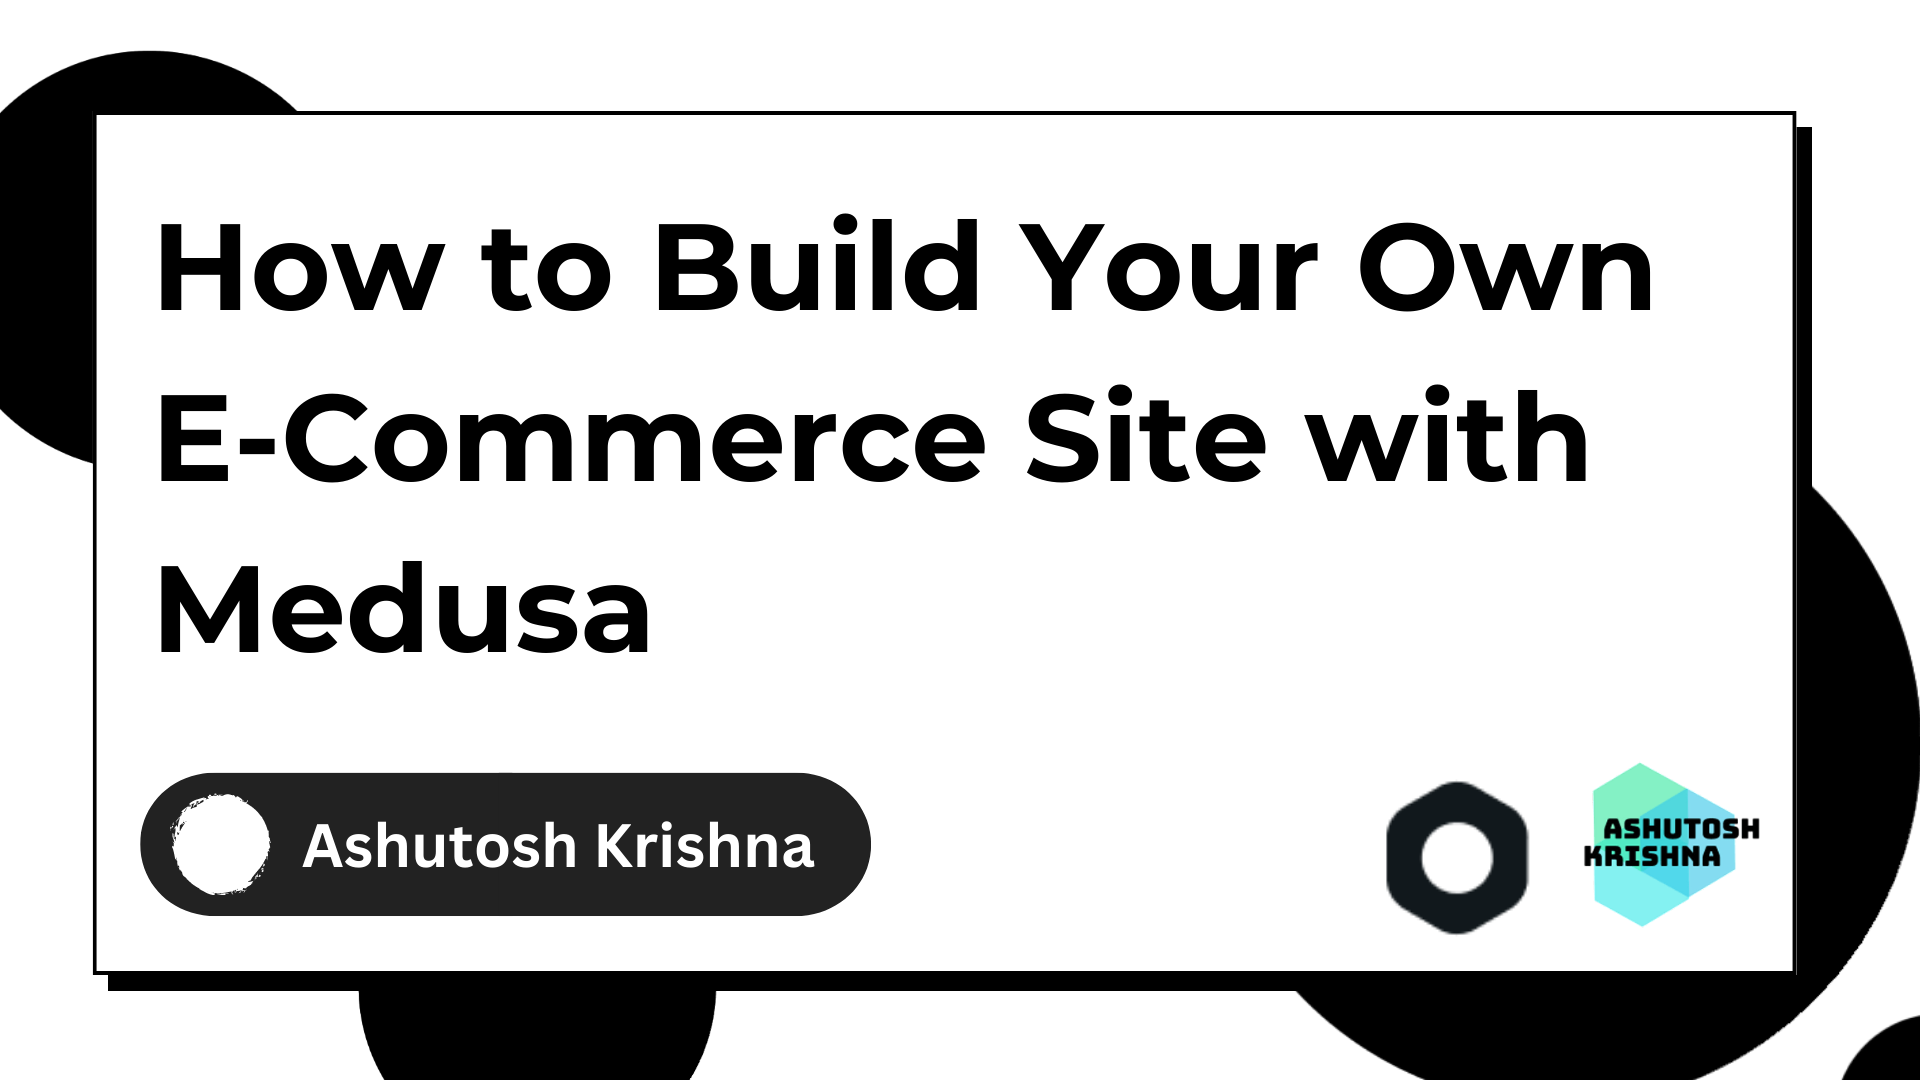 How to Build Your Own E-Commerce Site with Medusa